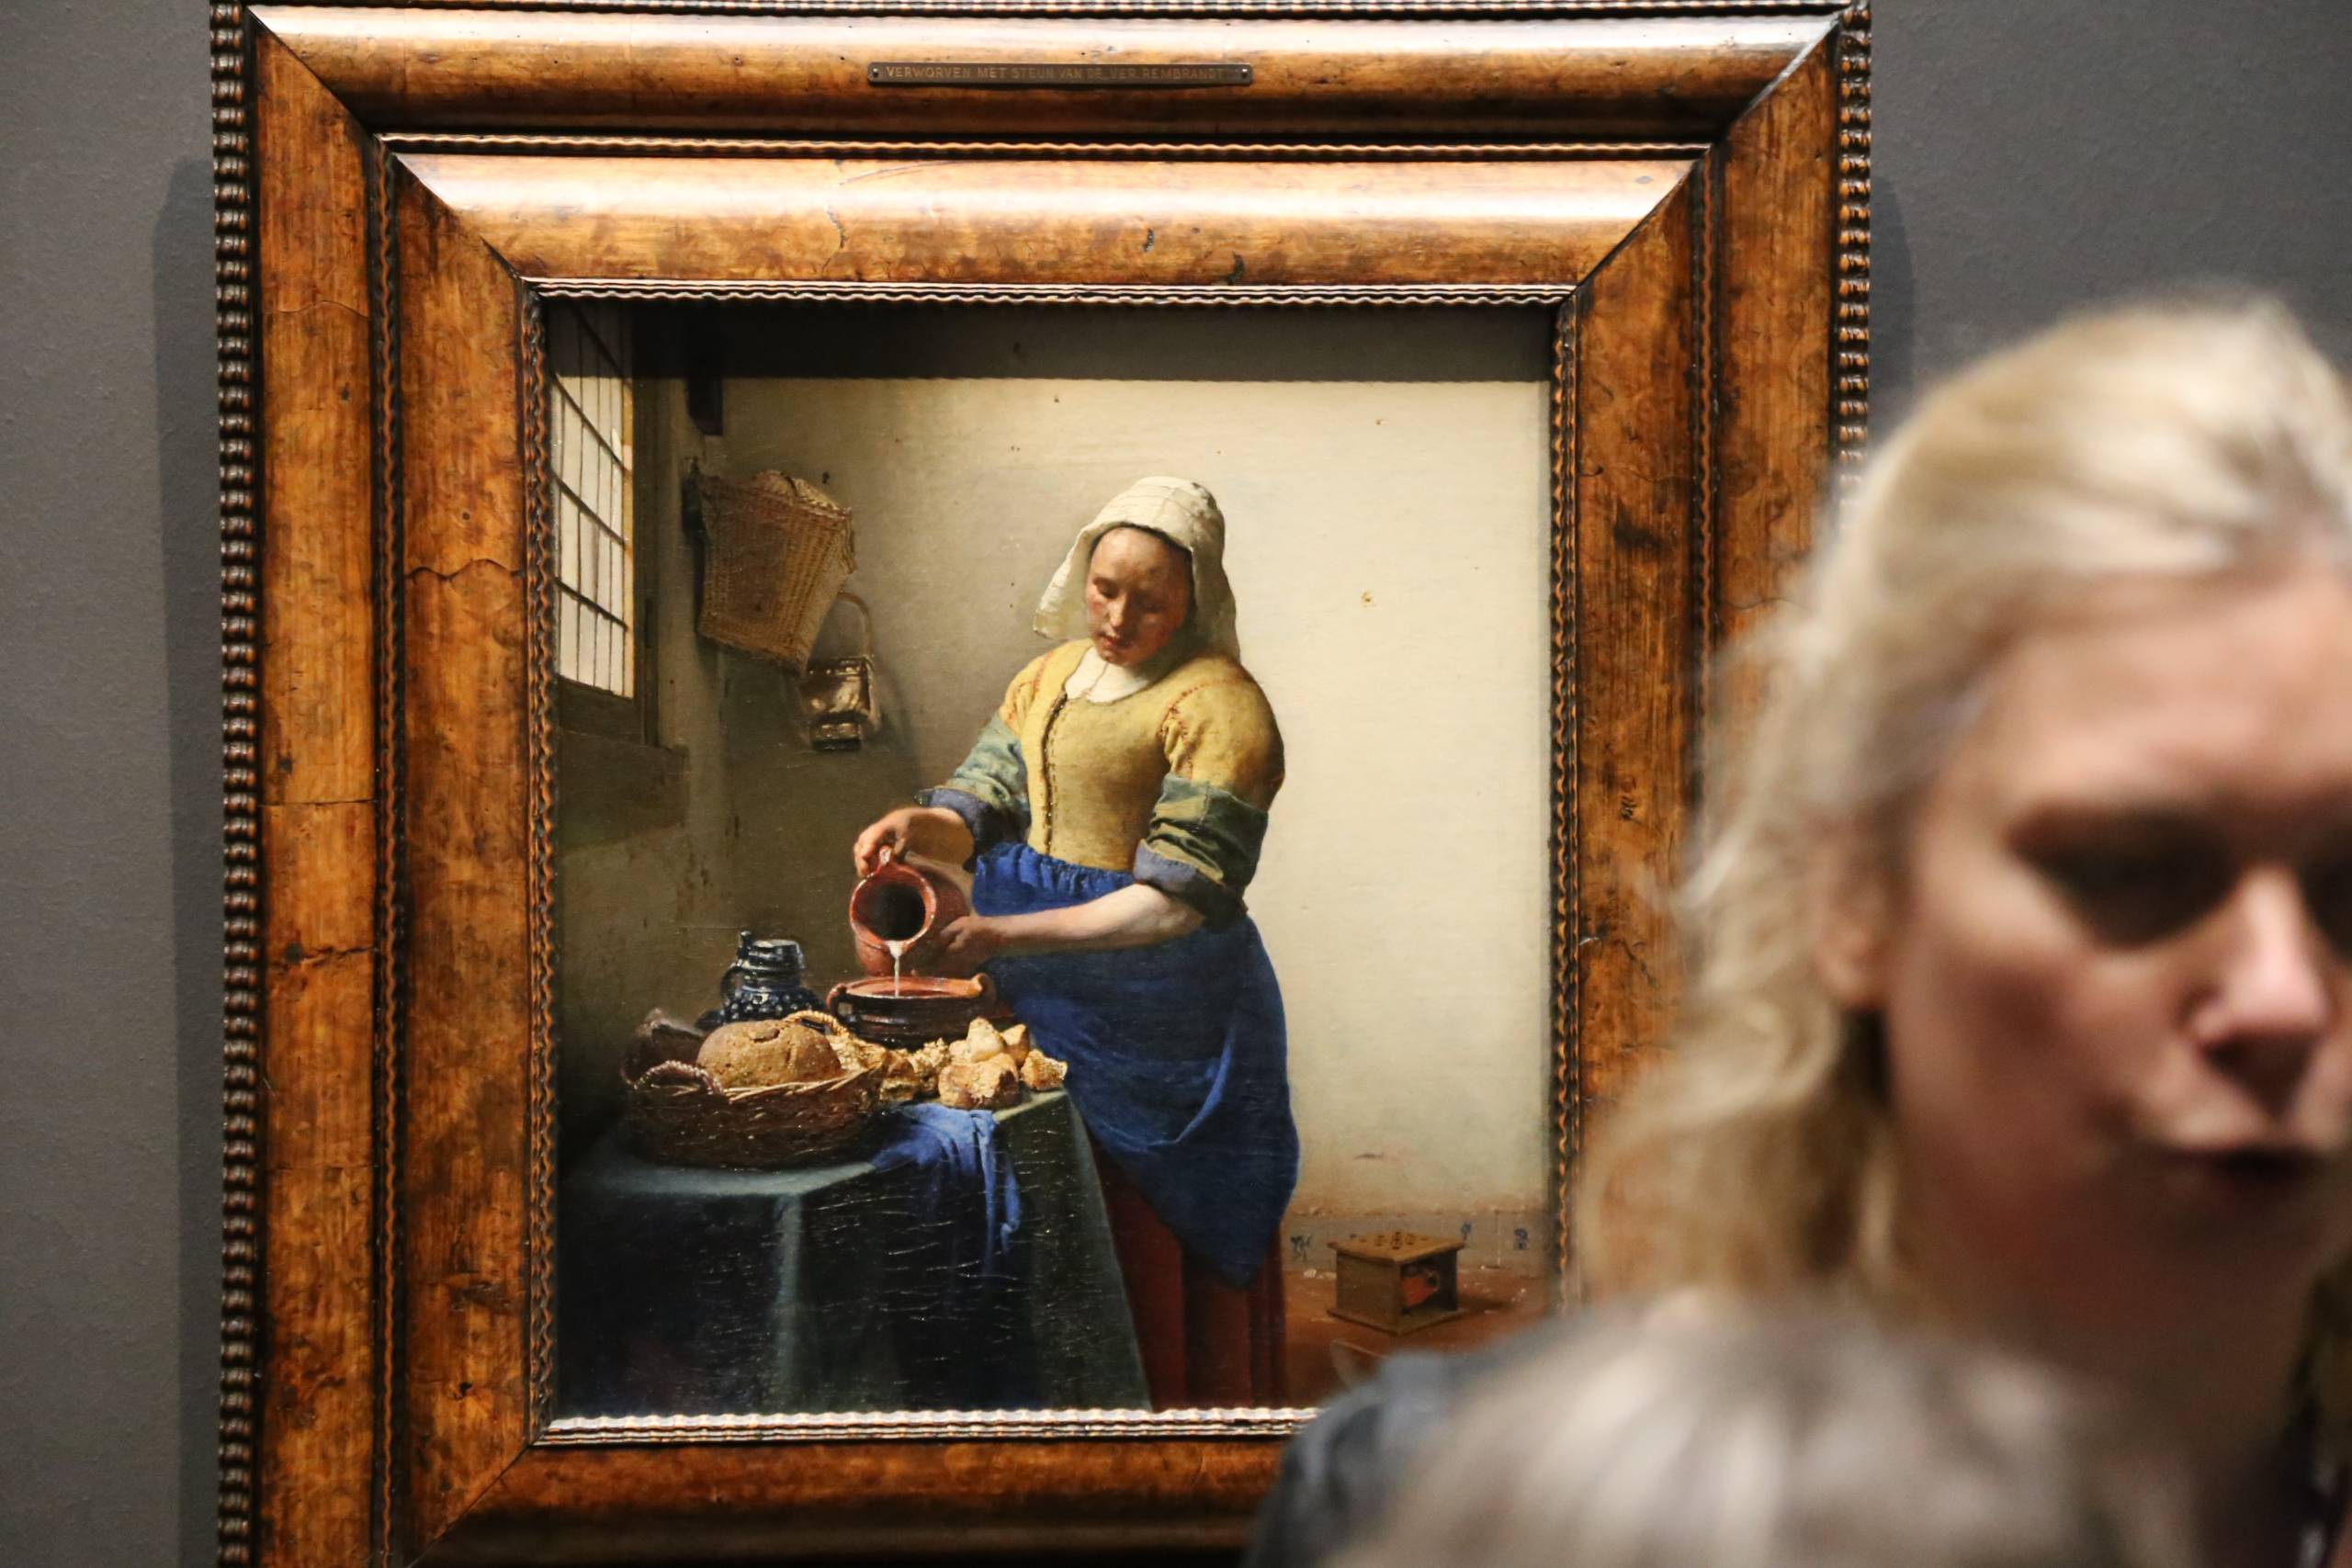 The Vermeer exhibition will run from 10 February to 4 June 2023 at Rijksmuseum, Amsterdam